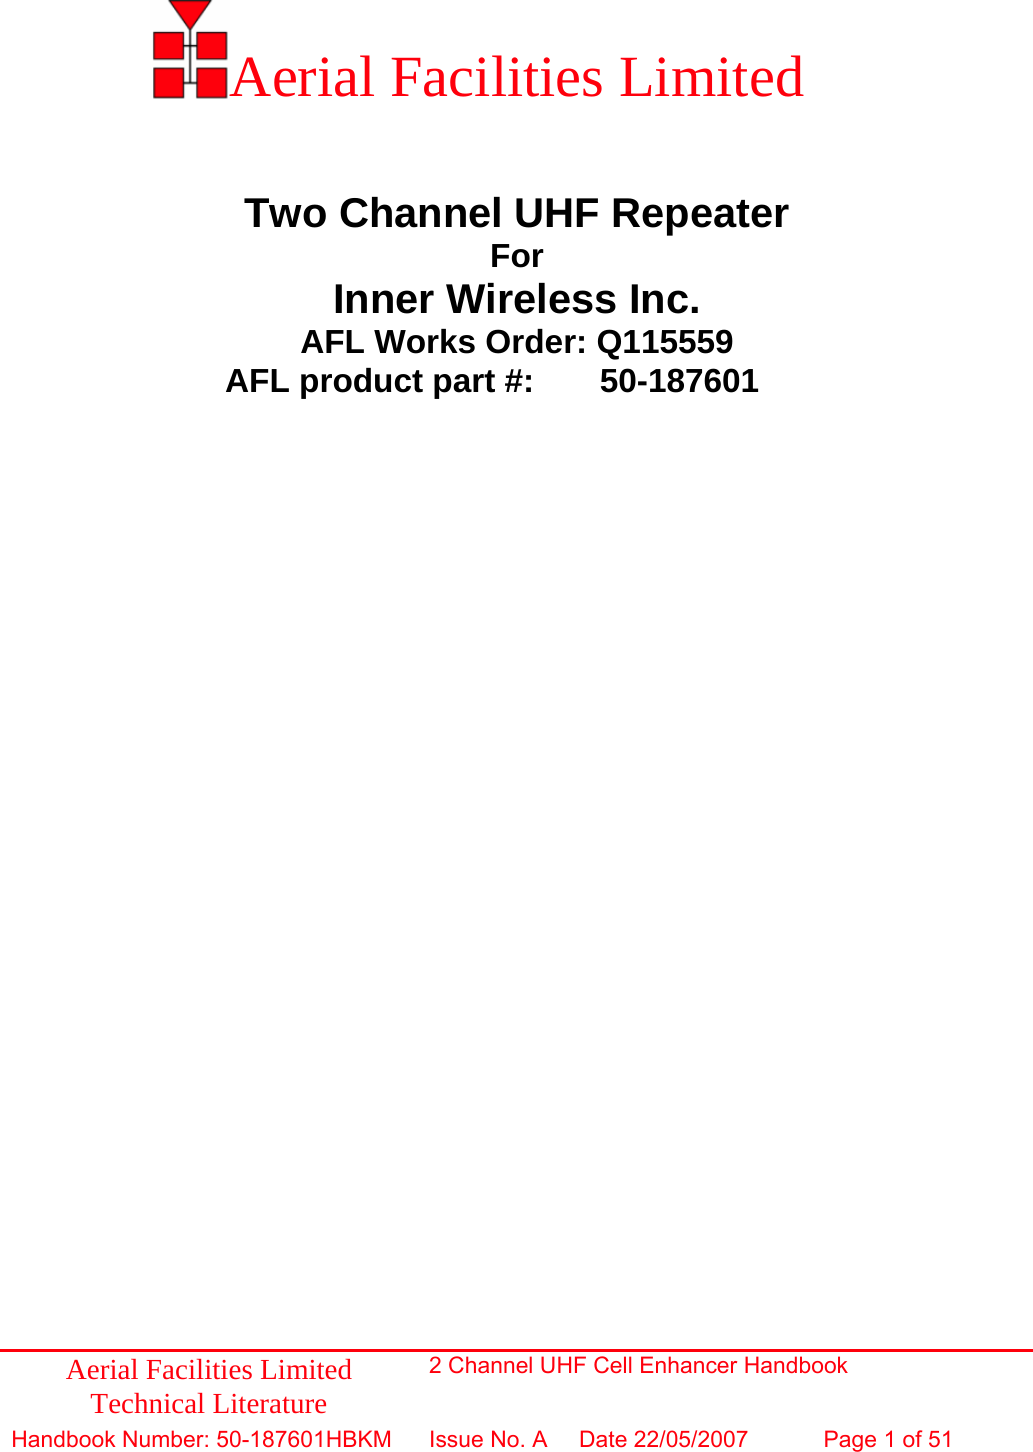          Aerial Facilities Limited    Two Channel UHF Repeater For Inner Wireless Inc. AFL Works Order: Q115559 AFL product part #:  50-187601     Aerial Facilities Limited Technical Literature 2 Channel UHF Cell Enhancer Handbook Handbook Number: 50-187601HBKM Issue No. A  Date 22/05/2007 Page 1 of 51  